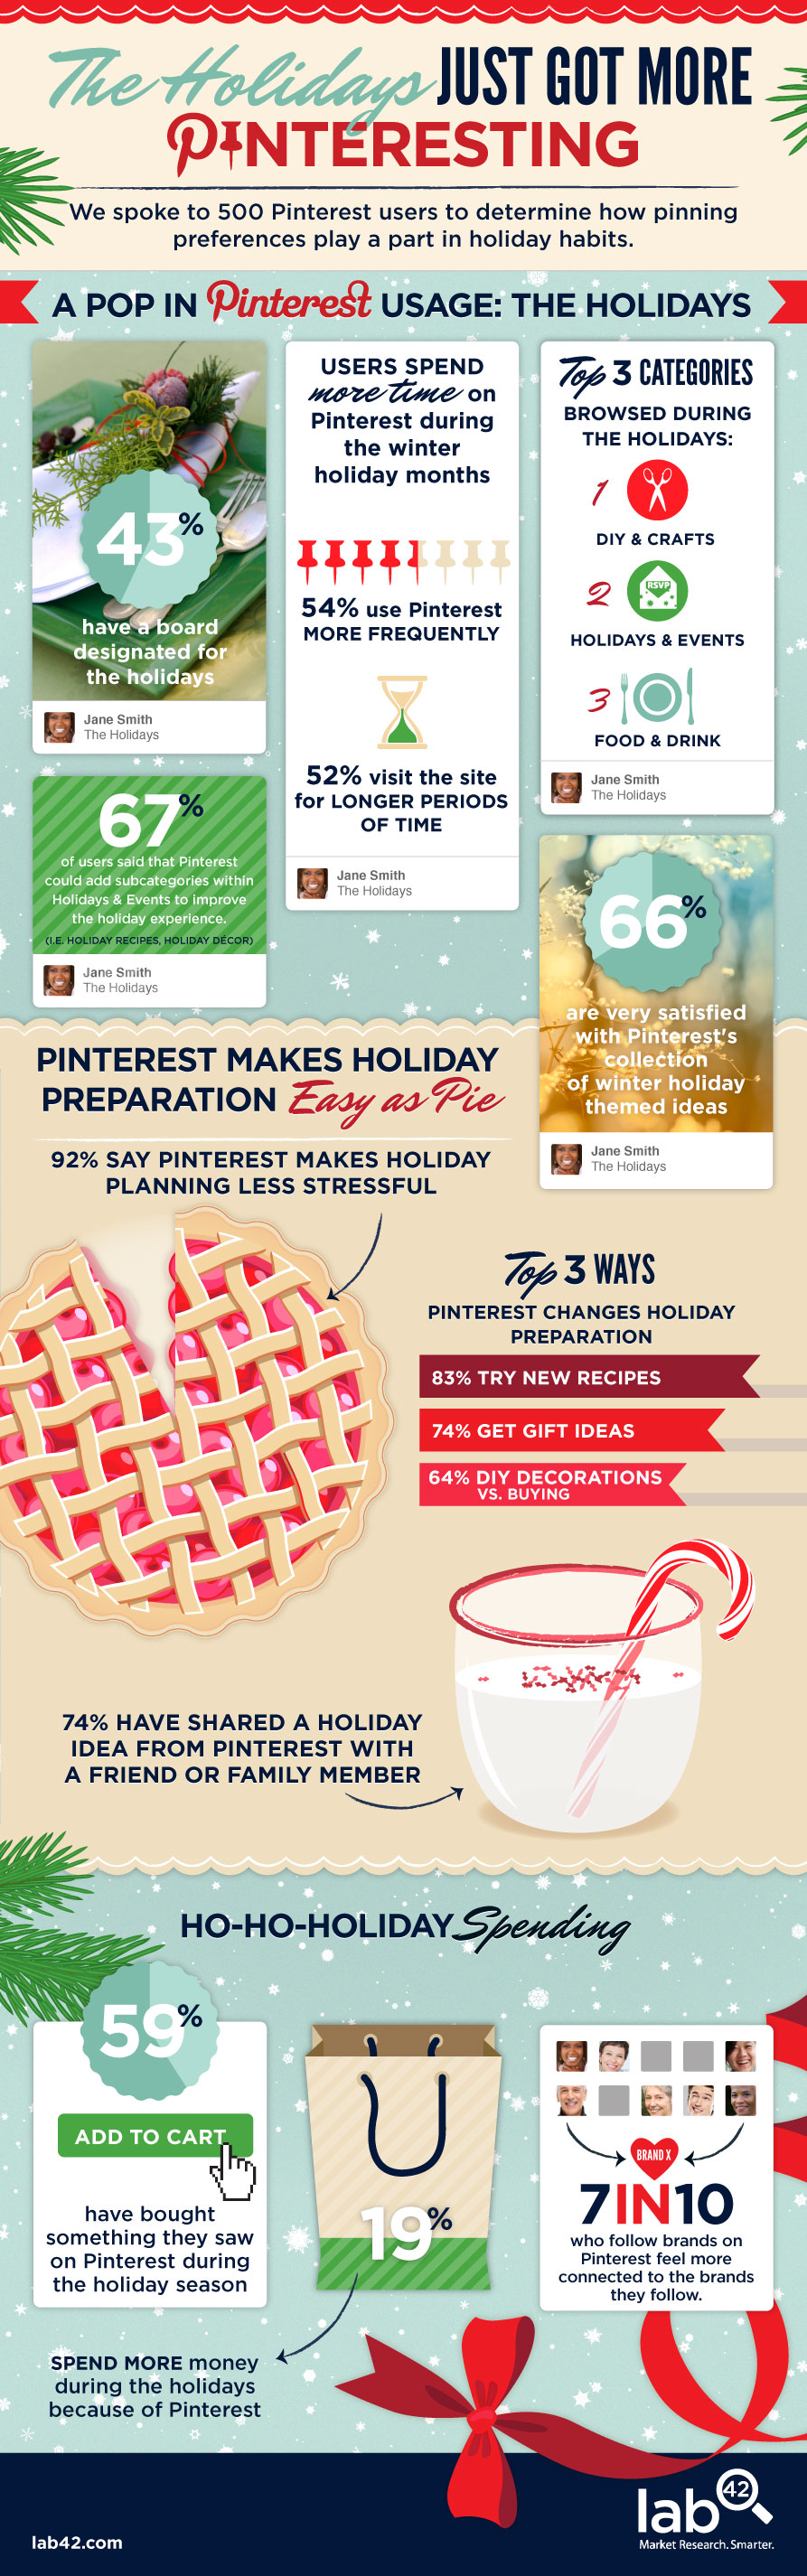 pinterest for holiday shopping